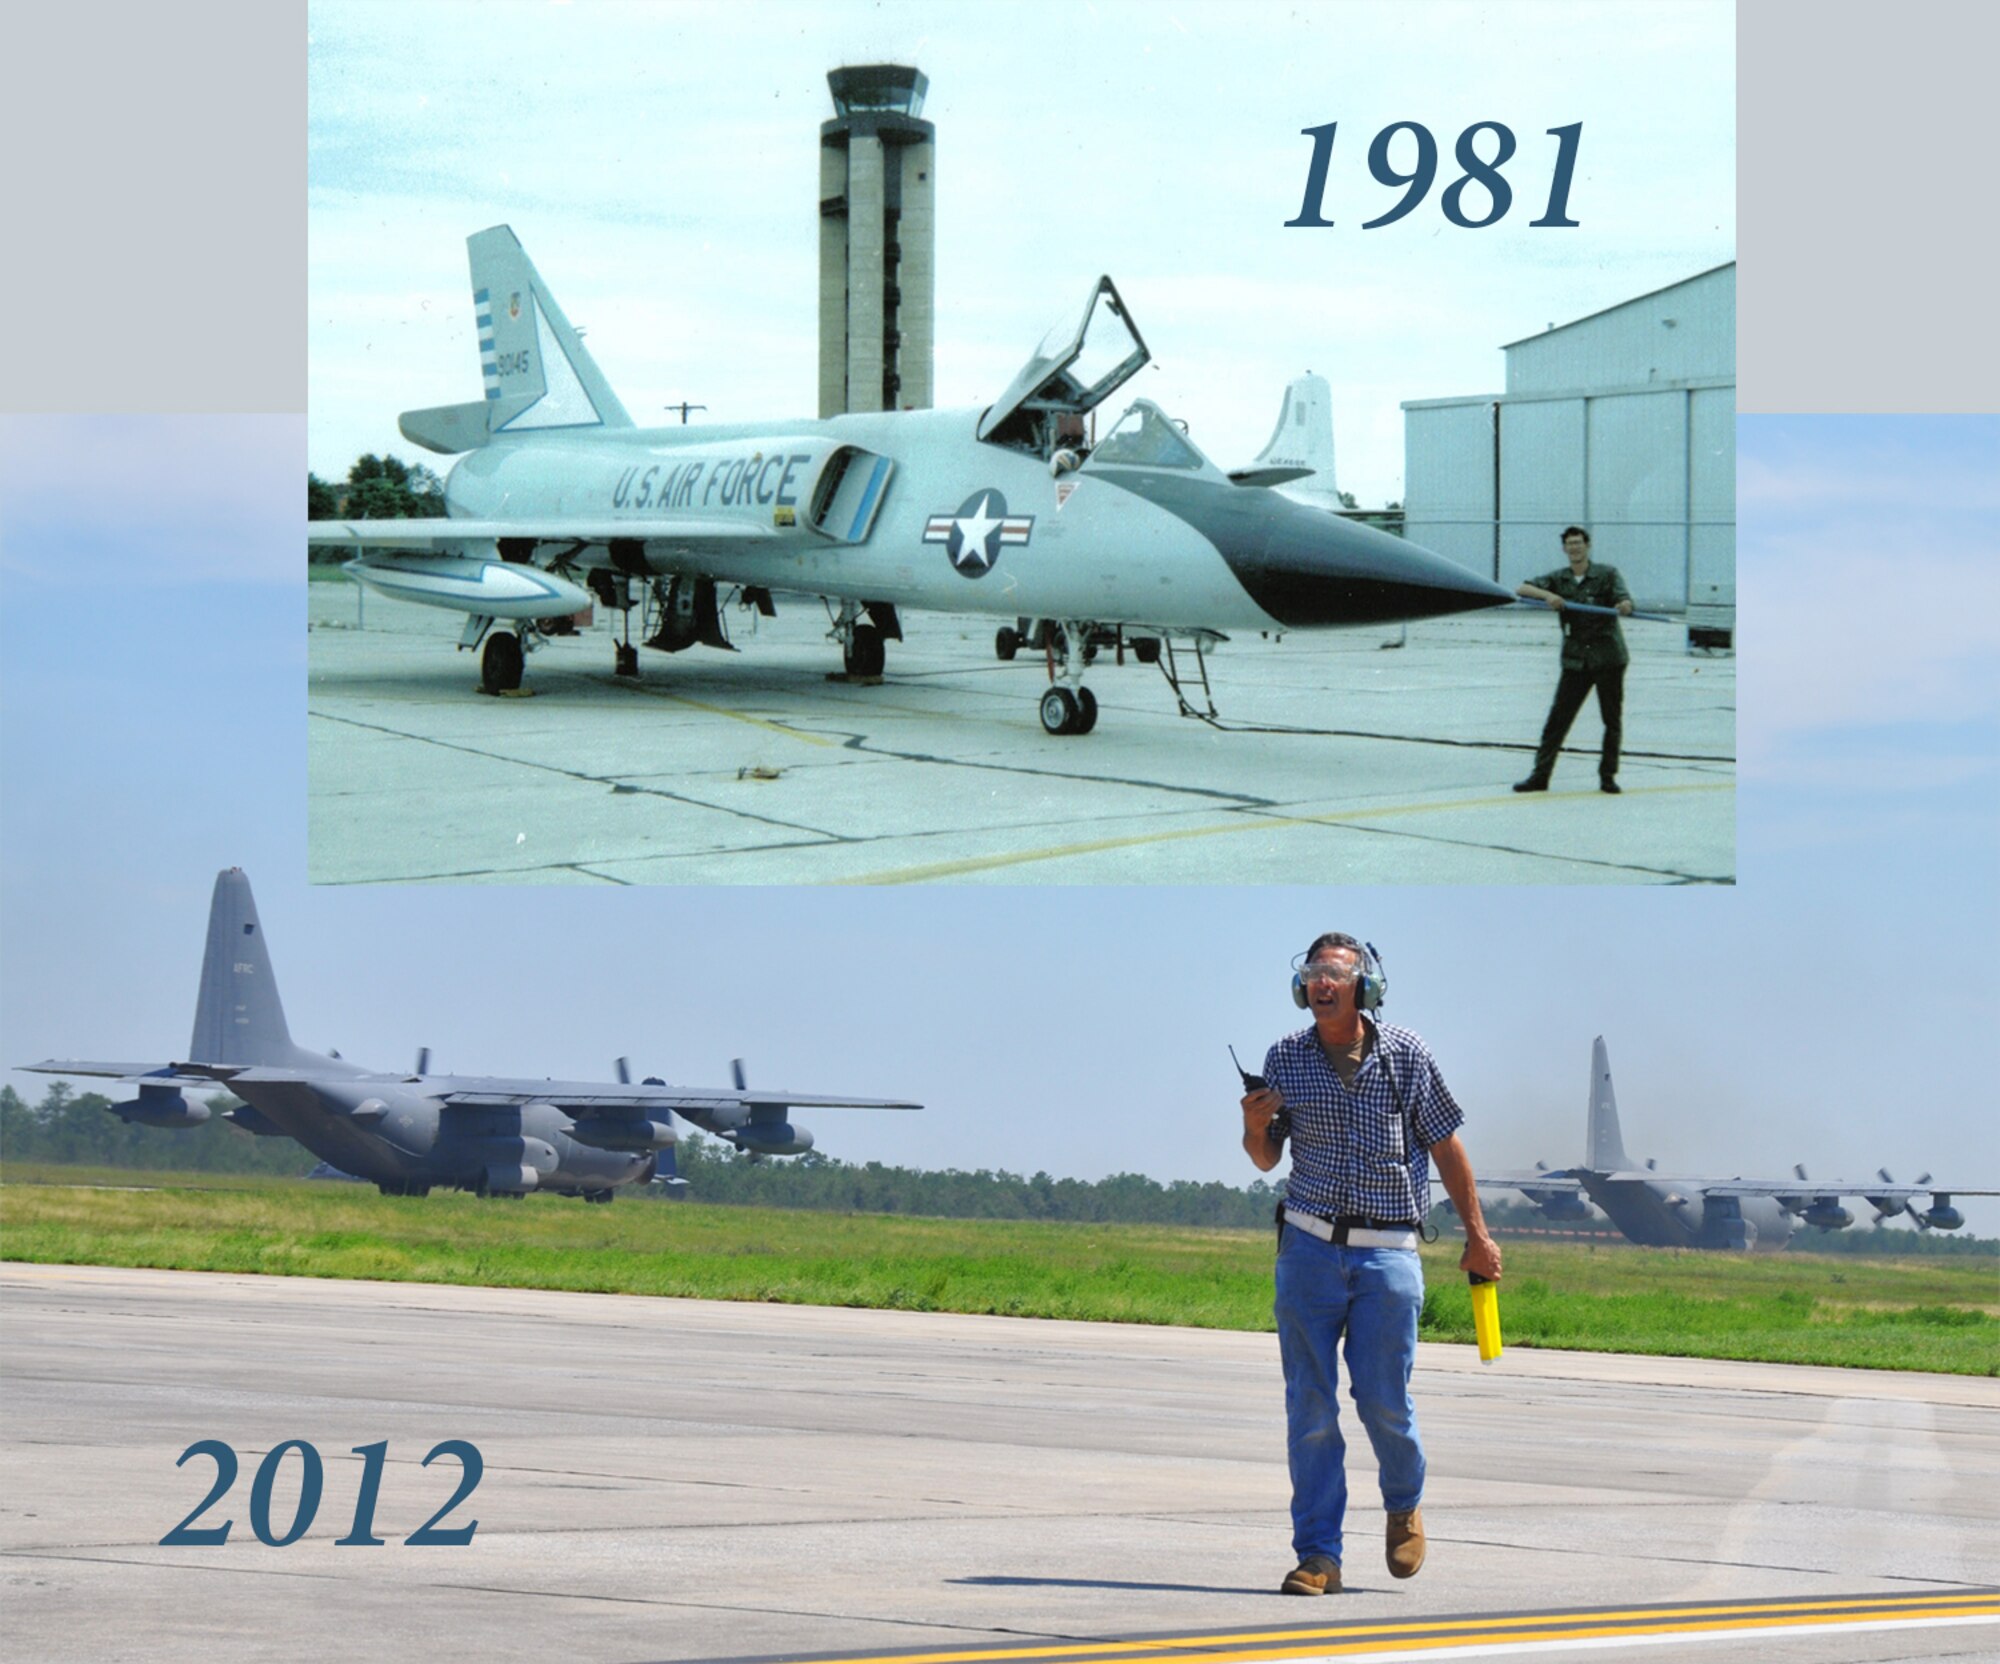 Congratulations to Tech. Sgt. Robert Wegeman on his 40 years of service to the U.S. Air Force.  Wegeman began his Air Force career in 1976 as a fighter aircraft maintainer.  From various fighters to C-130s and now the C-145, Wegeman continues to maintain aircraft.  He is set to retire next summer after 41 years of service.  (Graphic/Tech. Sgt. Sam King)